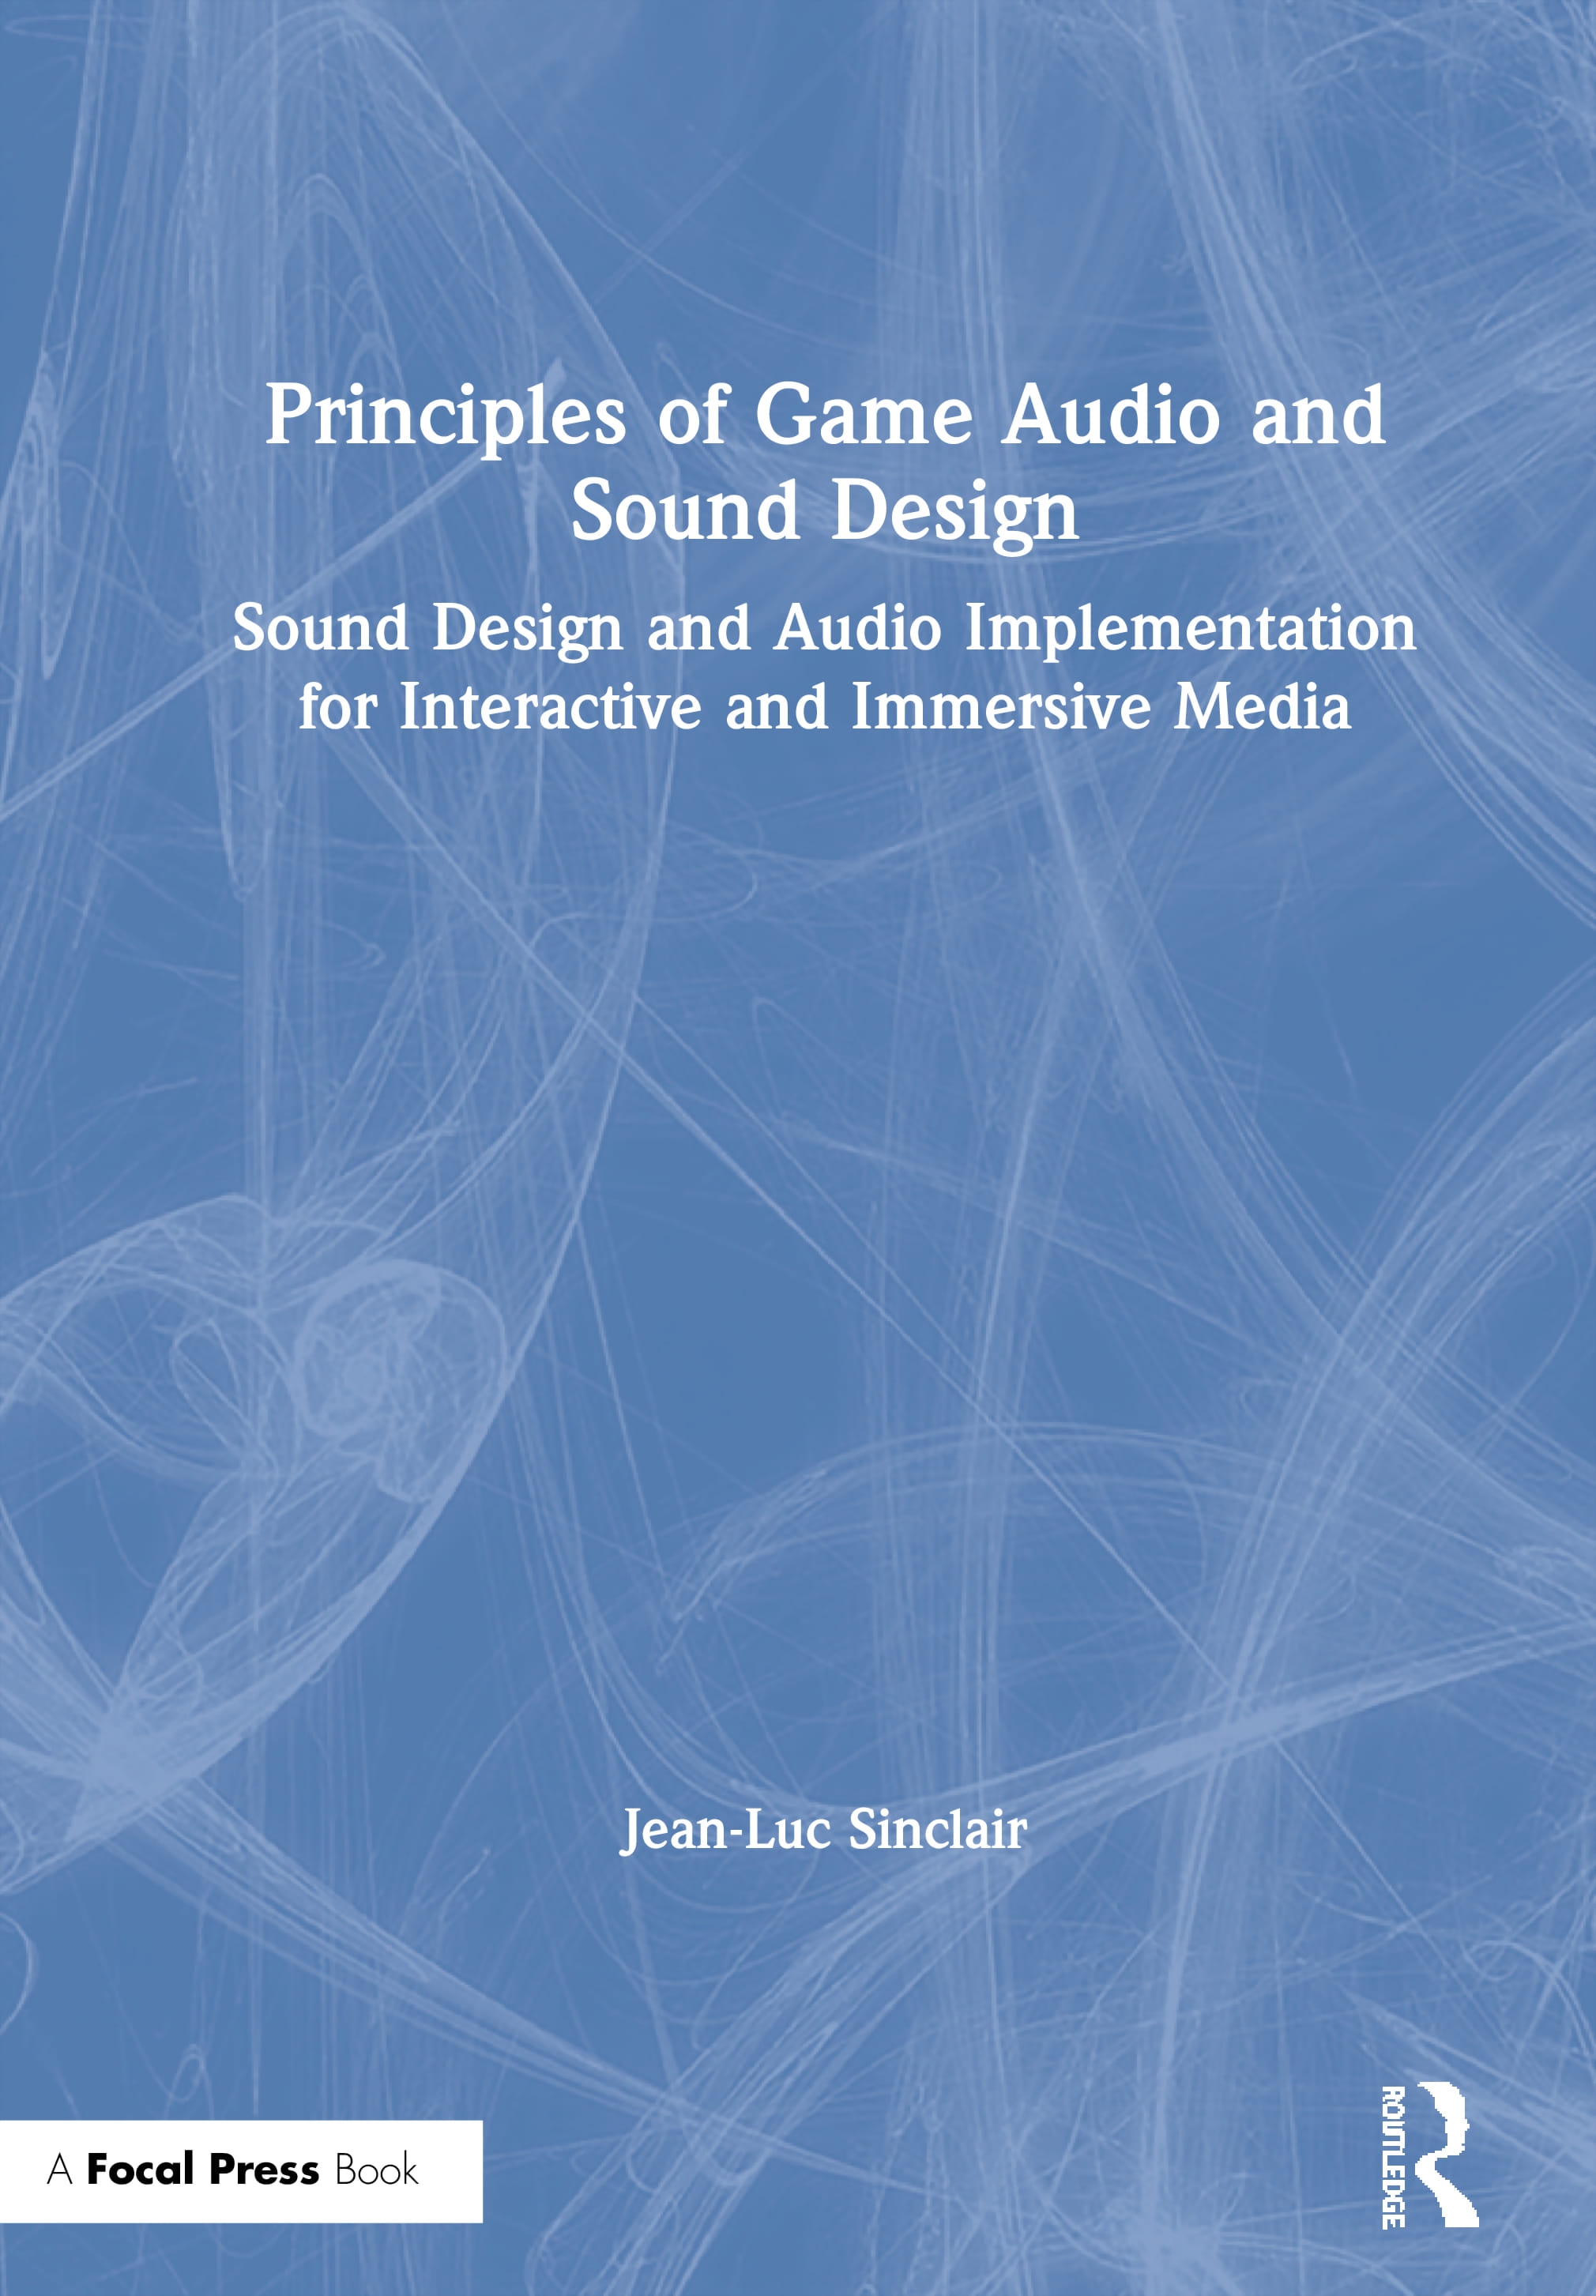 Principles of Game Audio and Sound Design: Sound Design and Audio Implementation for Interactive and Immersive Media